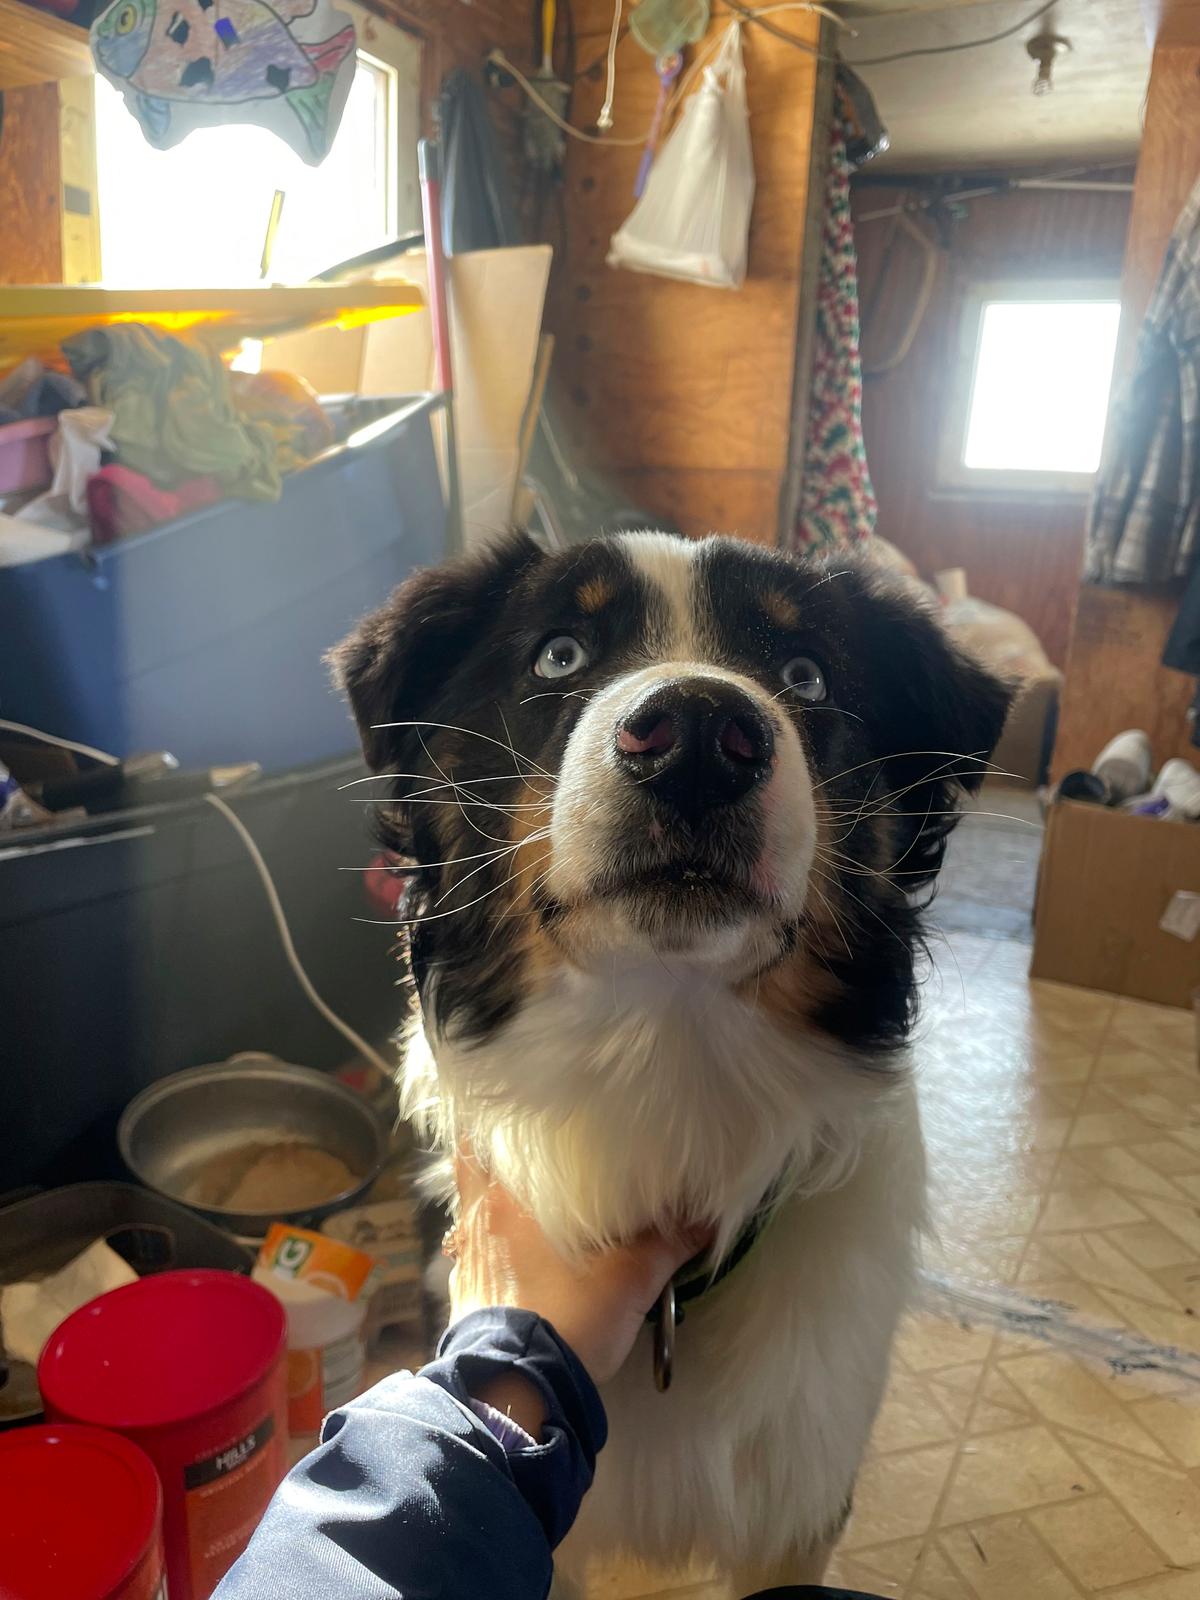 A photo provided by Mandy Iworrigan shows Nanuq, a 1-year-old Australian shepherd, after he was returned to Gambell, Alaska, on April 6, 2023. (Mandy Iworrigan/AP Photo)